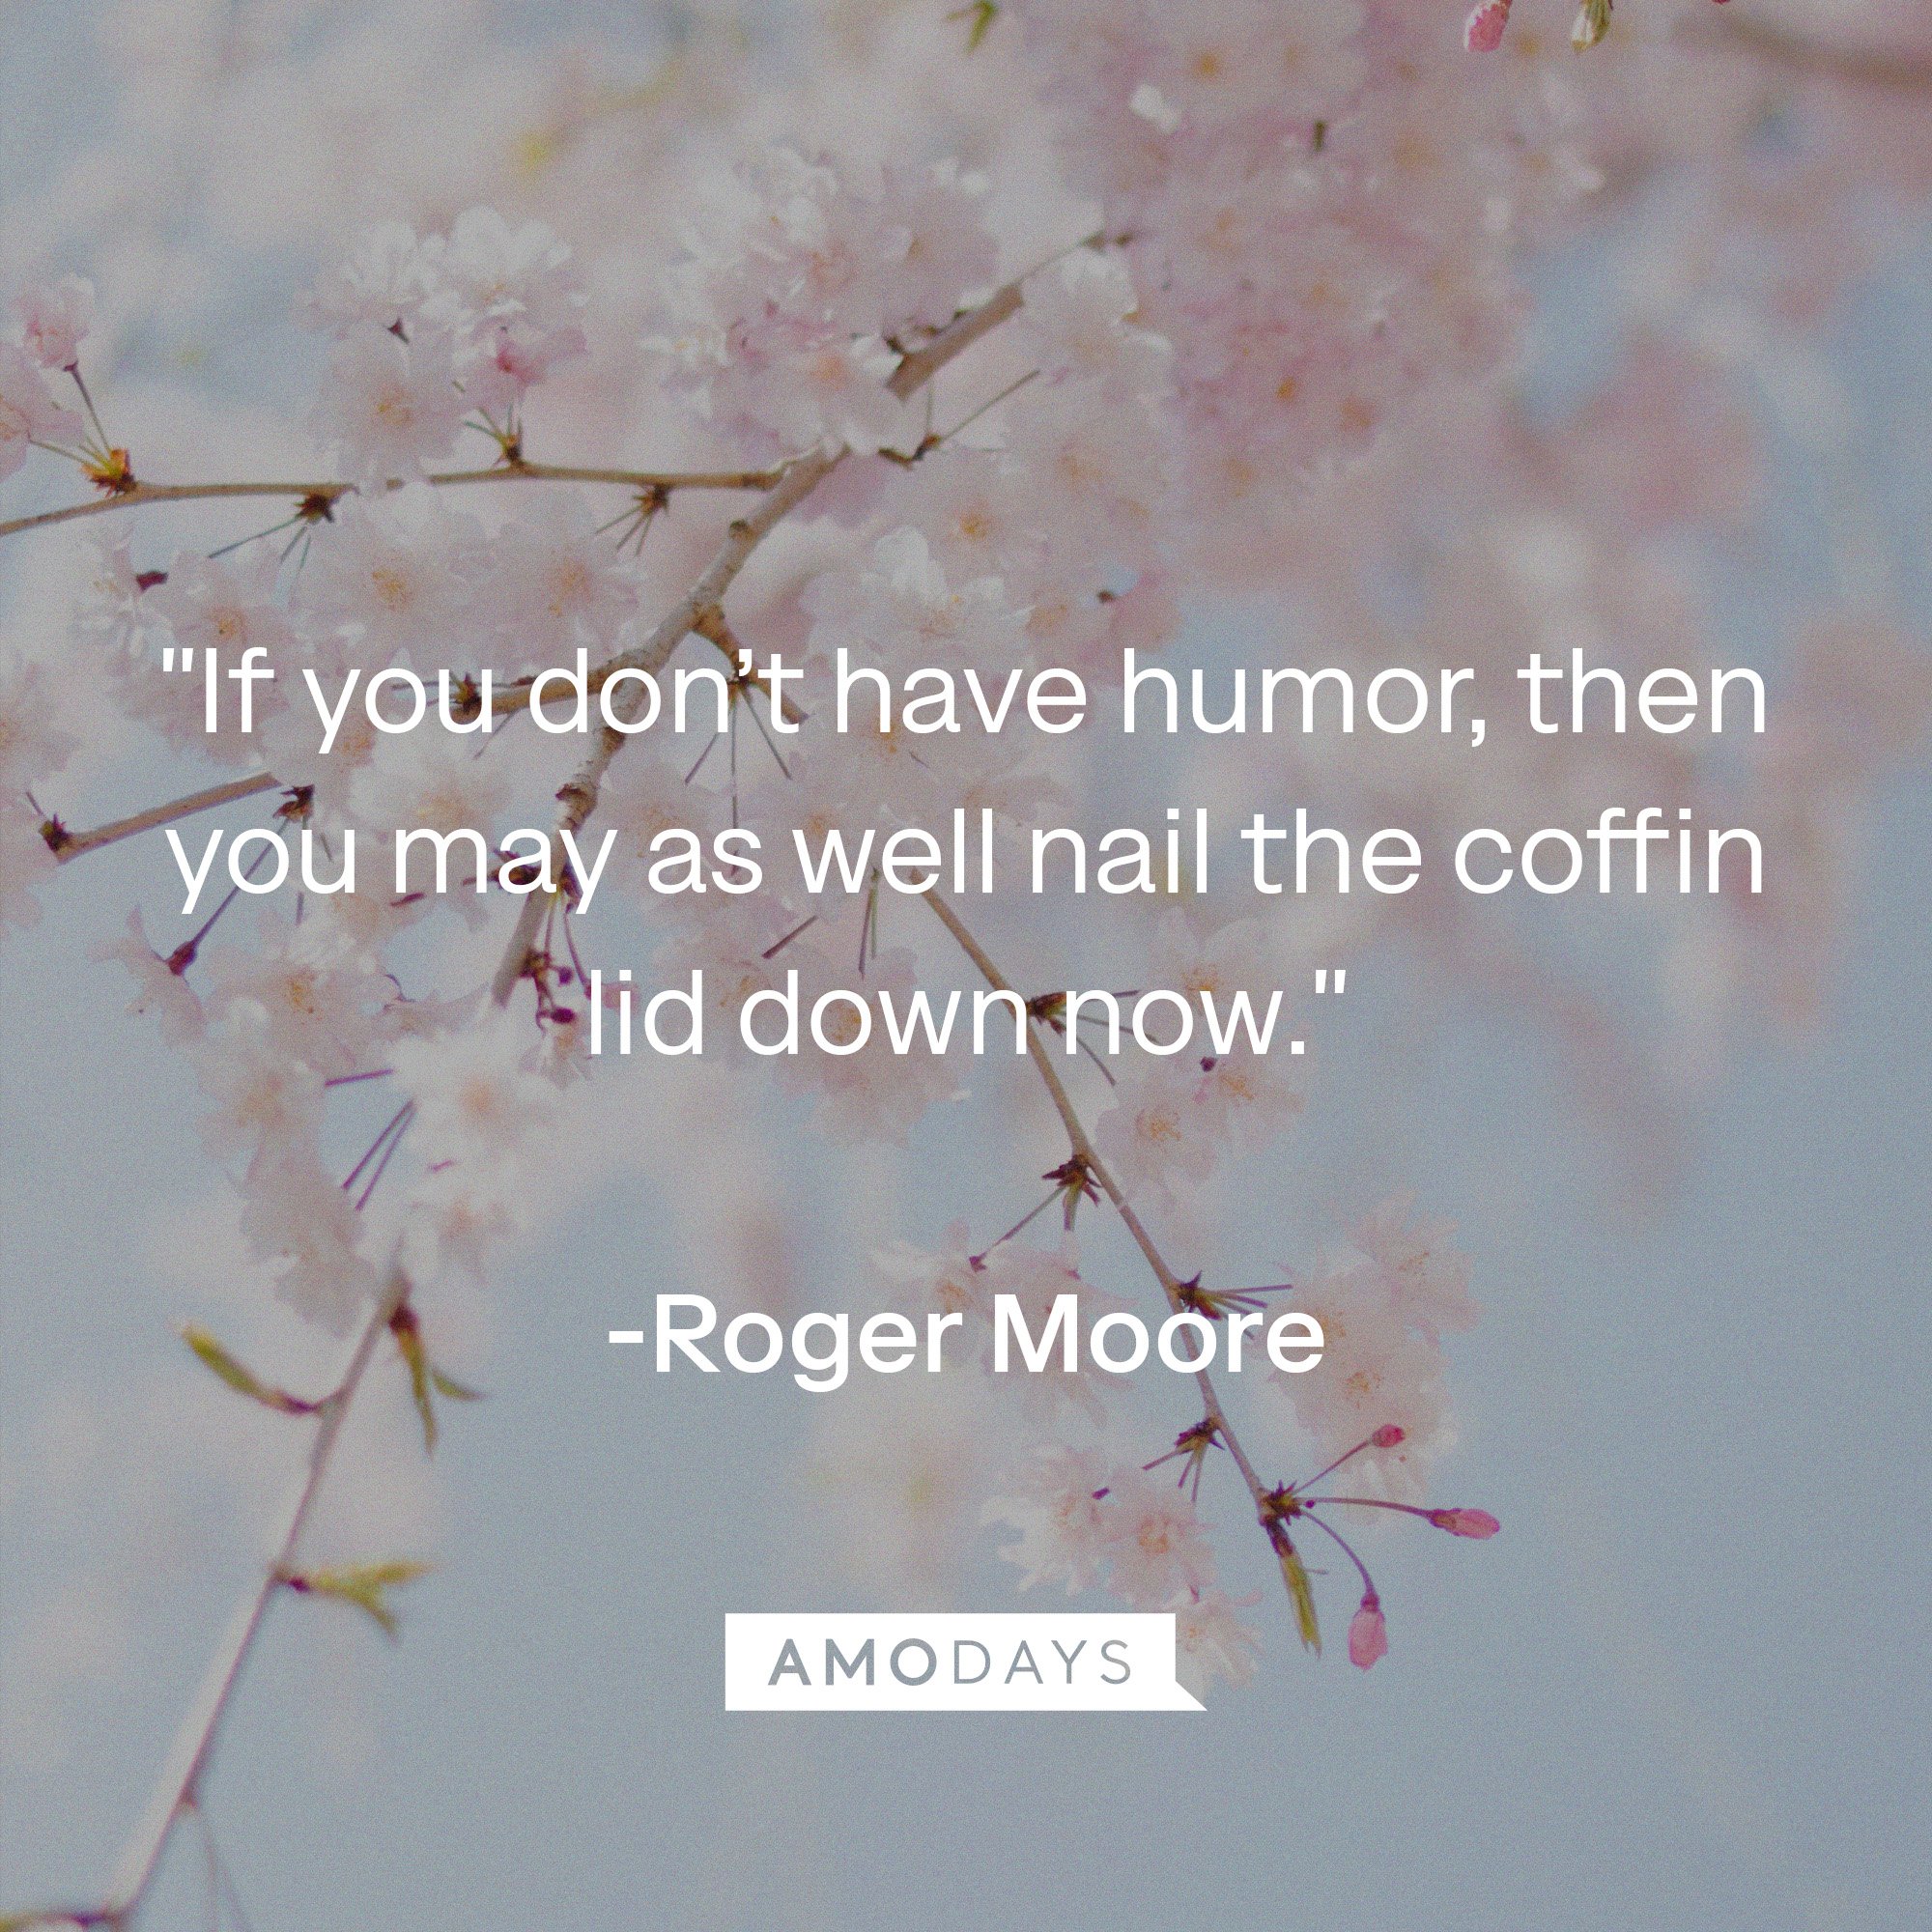 Roger Moore's quote: "If you don't have humour, then you may as well nail the coffin lid down now."   | Source: Getty Images